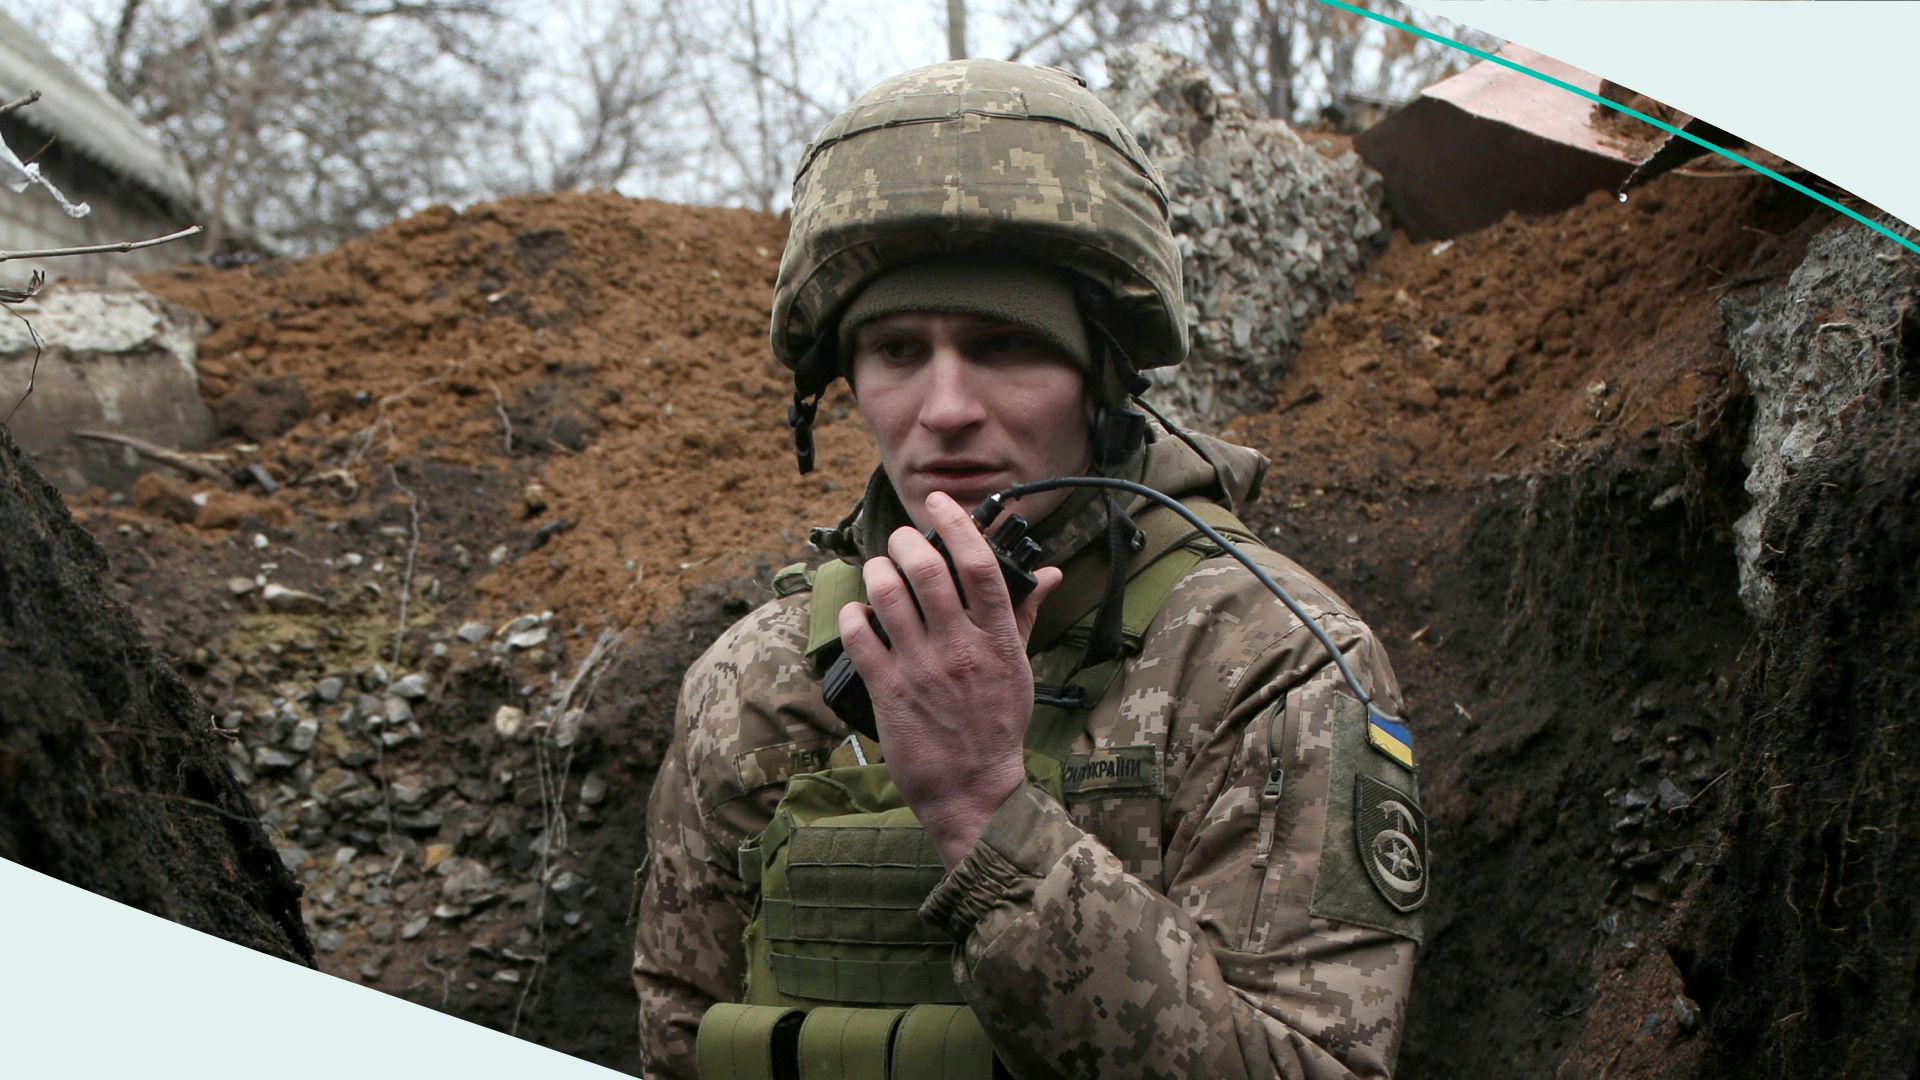 A serviceman of Ukrainian Military Forces speaks as he keeps position on the front line with Russia backed separatists, near Novolugansk, in the Donetsk region, on February 17, 2022